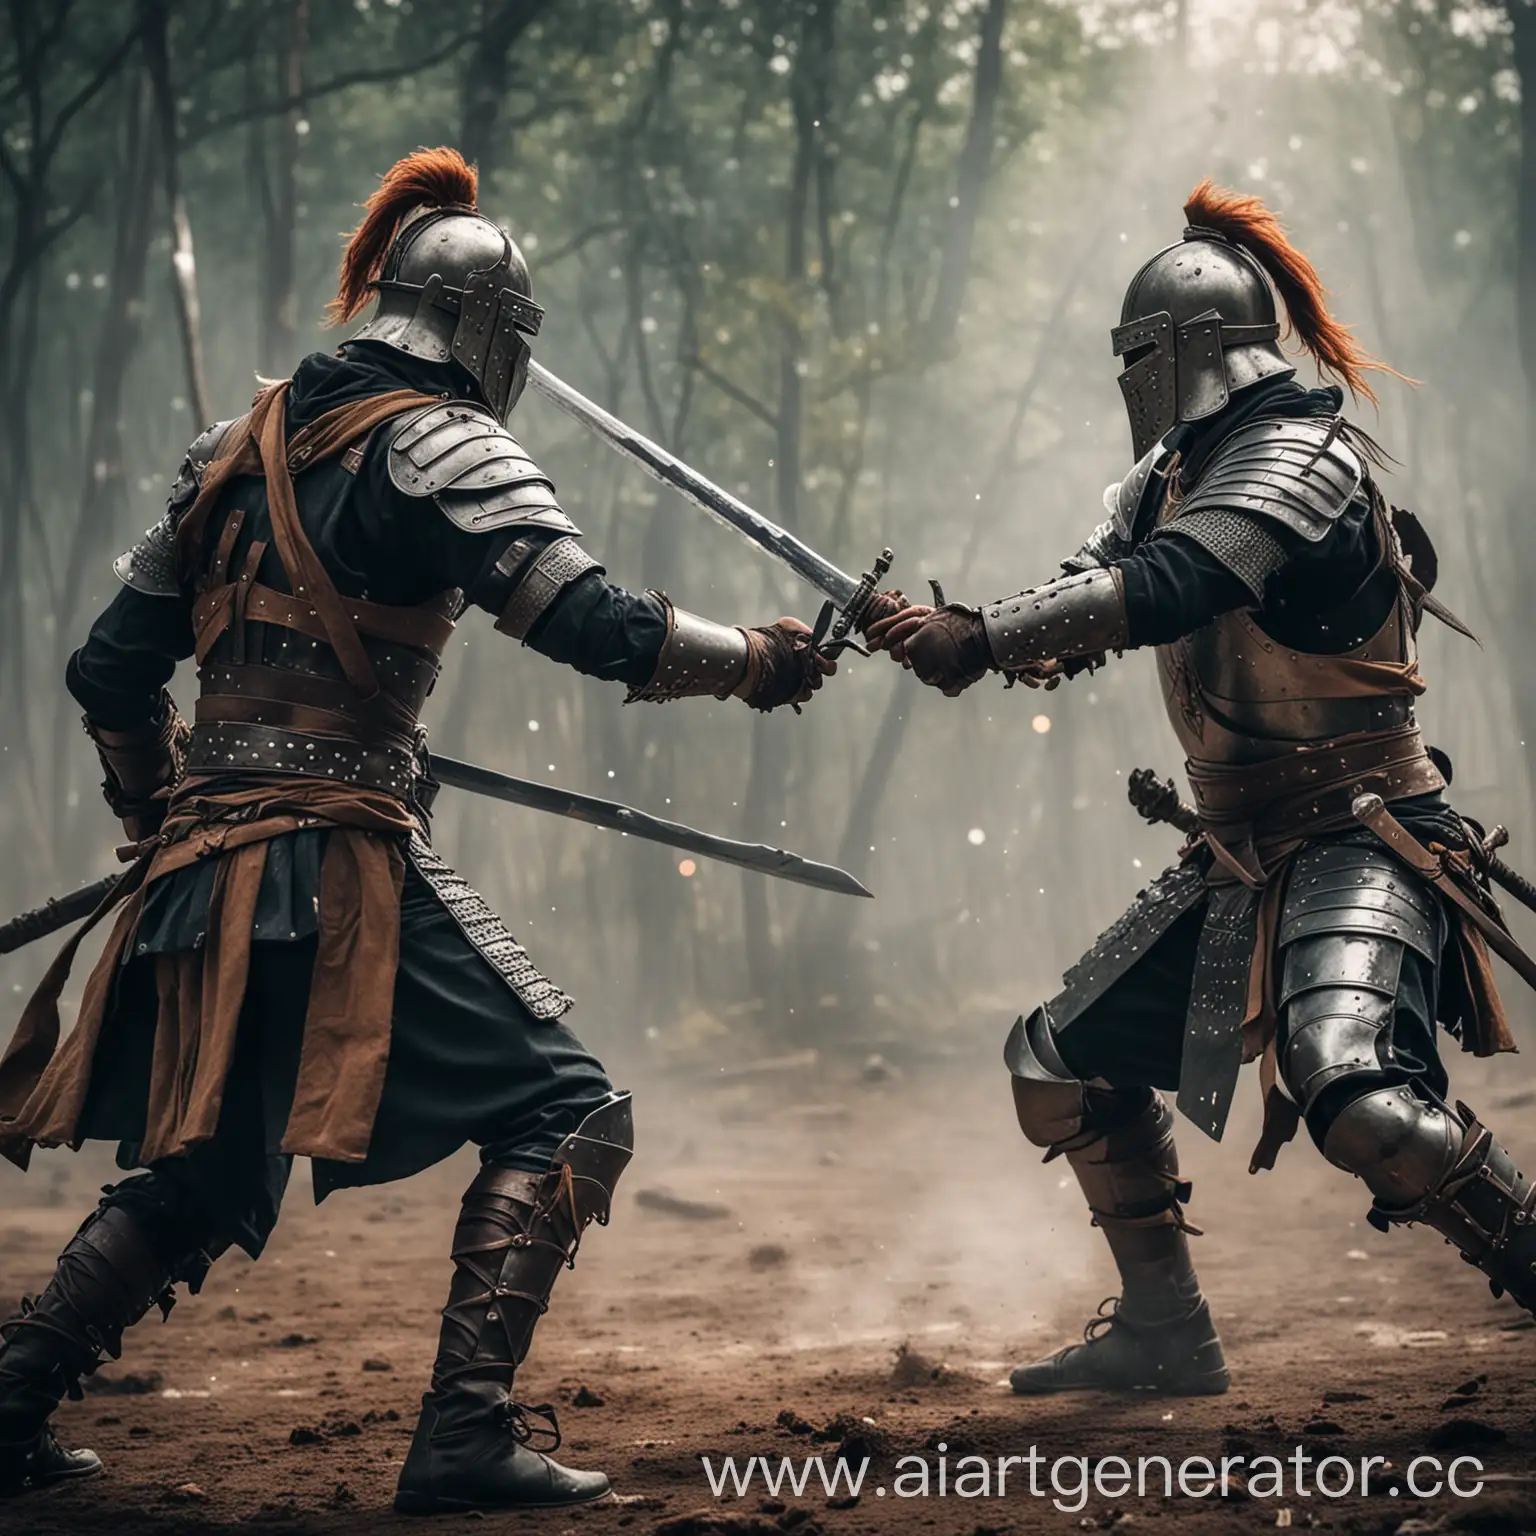 Medieval-Duel-Plate-Armored-Warriors-Engaged-in-Sword-Fight